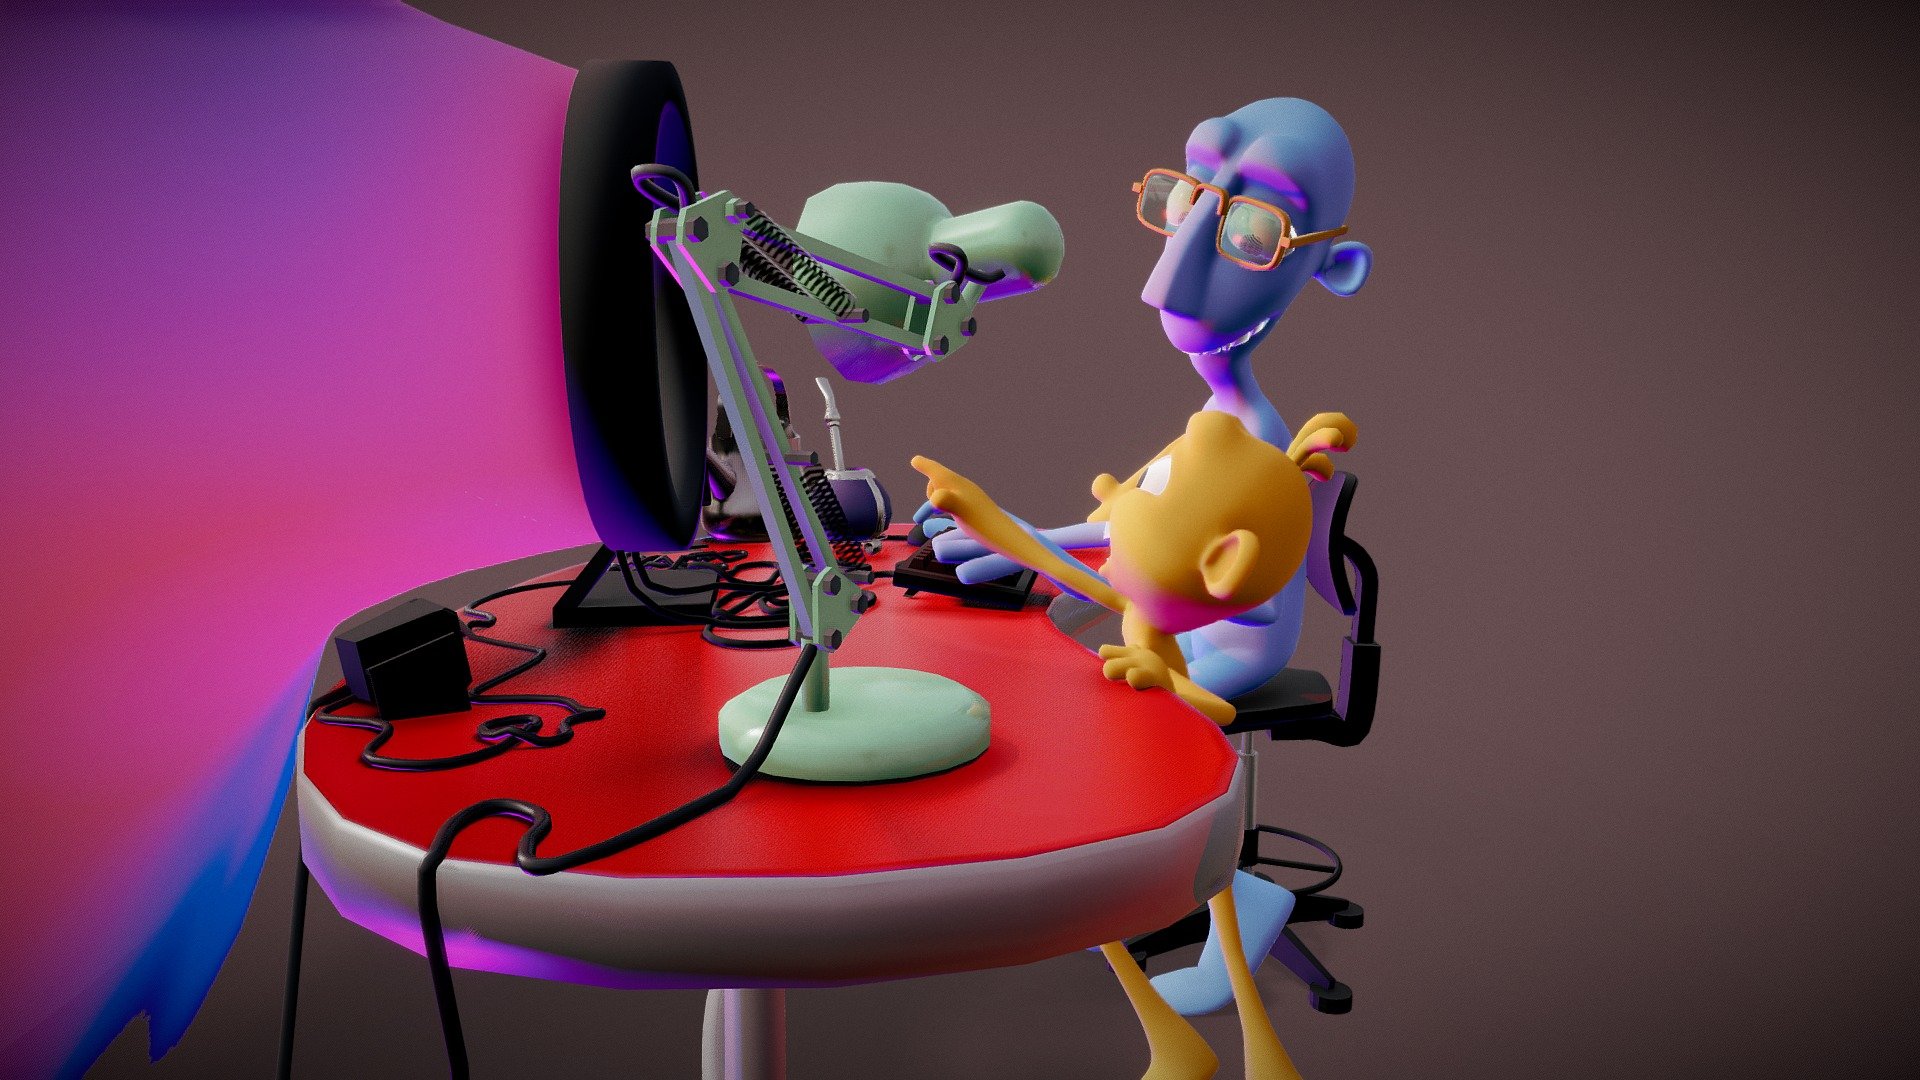 Participation in the competition Make a Splash in Amsterdam
remix of 2.76 splashscreen with the characters from “Alike”, computer-animated short film directed by Daniel Martínez Lara and Rafa Cano Méndez

Blenderartist post https://blenderartists.org/t/wip-alike-remix/1405262 - Alike new job - Download Free 3D model by flacoescopeta (@flacoescopet) 3d model